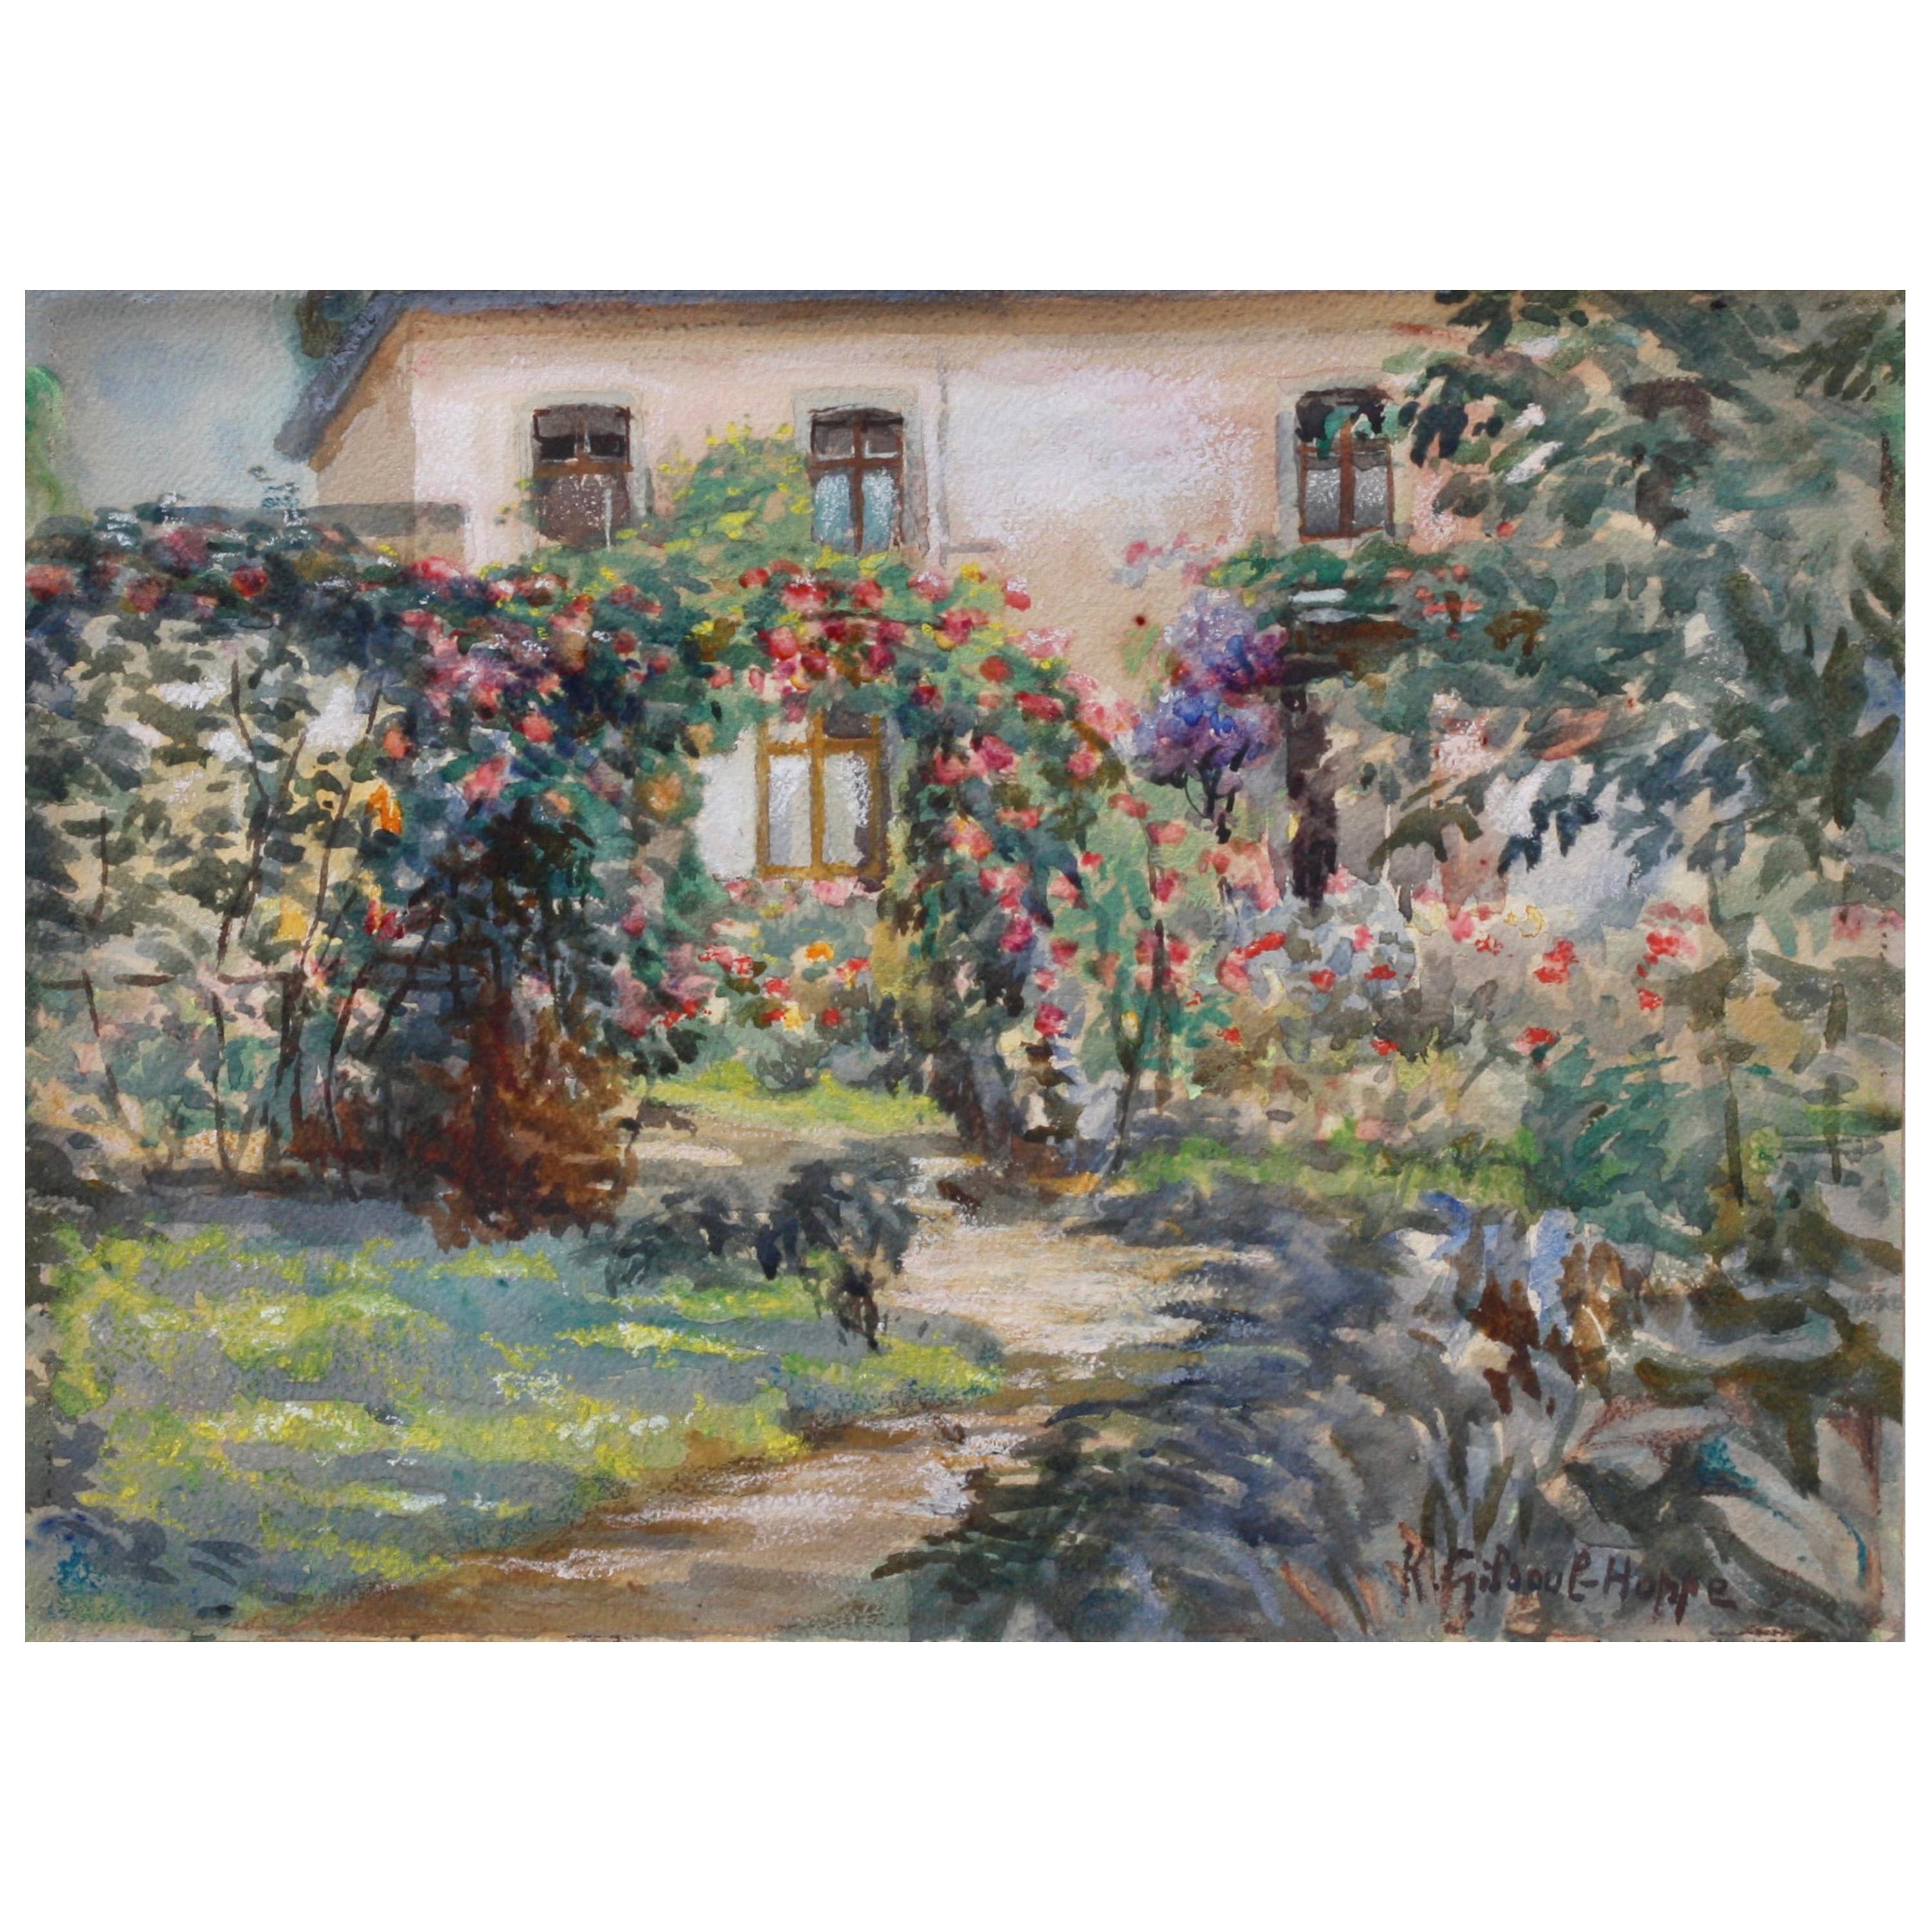 "Garden Scene" Ink and Watercolor Drawing, Signed Lower Right "K Gilsoul-Hoppe" For Sale